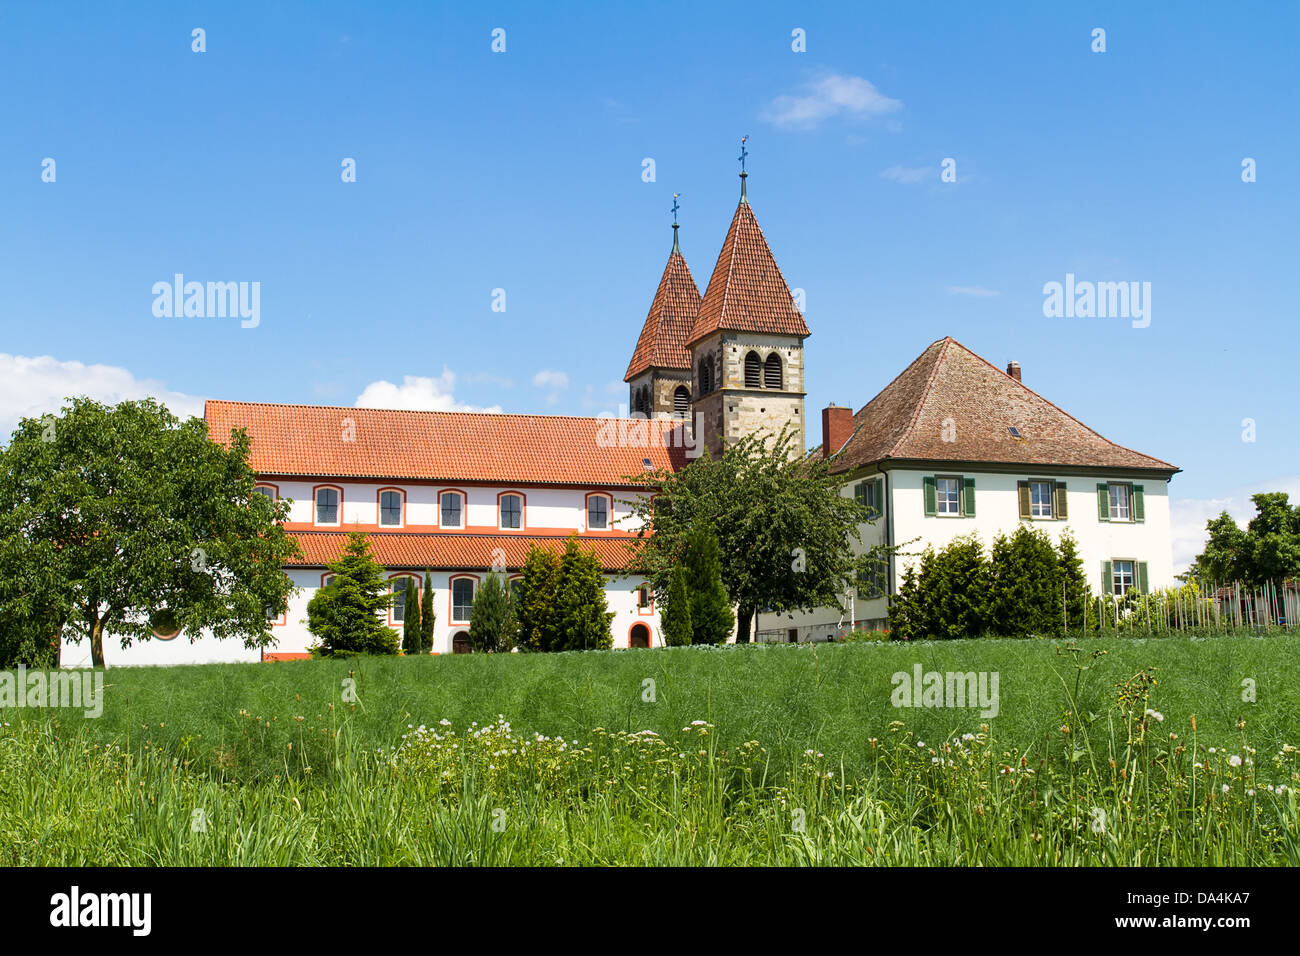 St. Peter and Paul Church on the island of Reichenau, Lake Constance, Germany Stock Photo